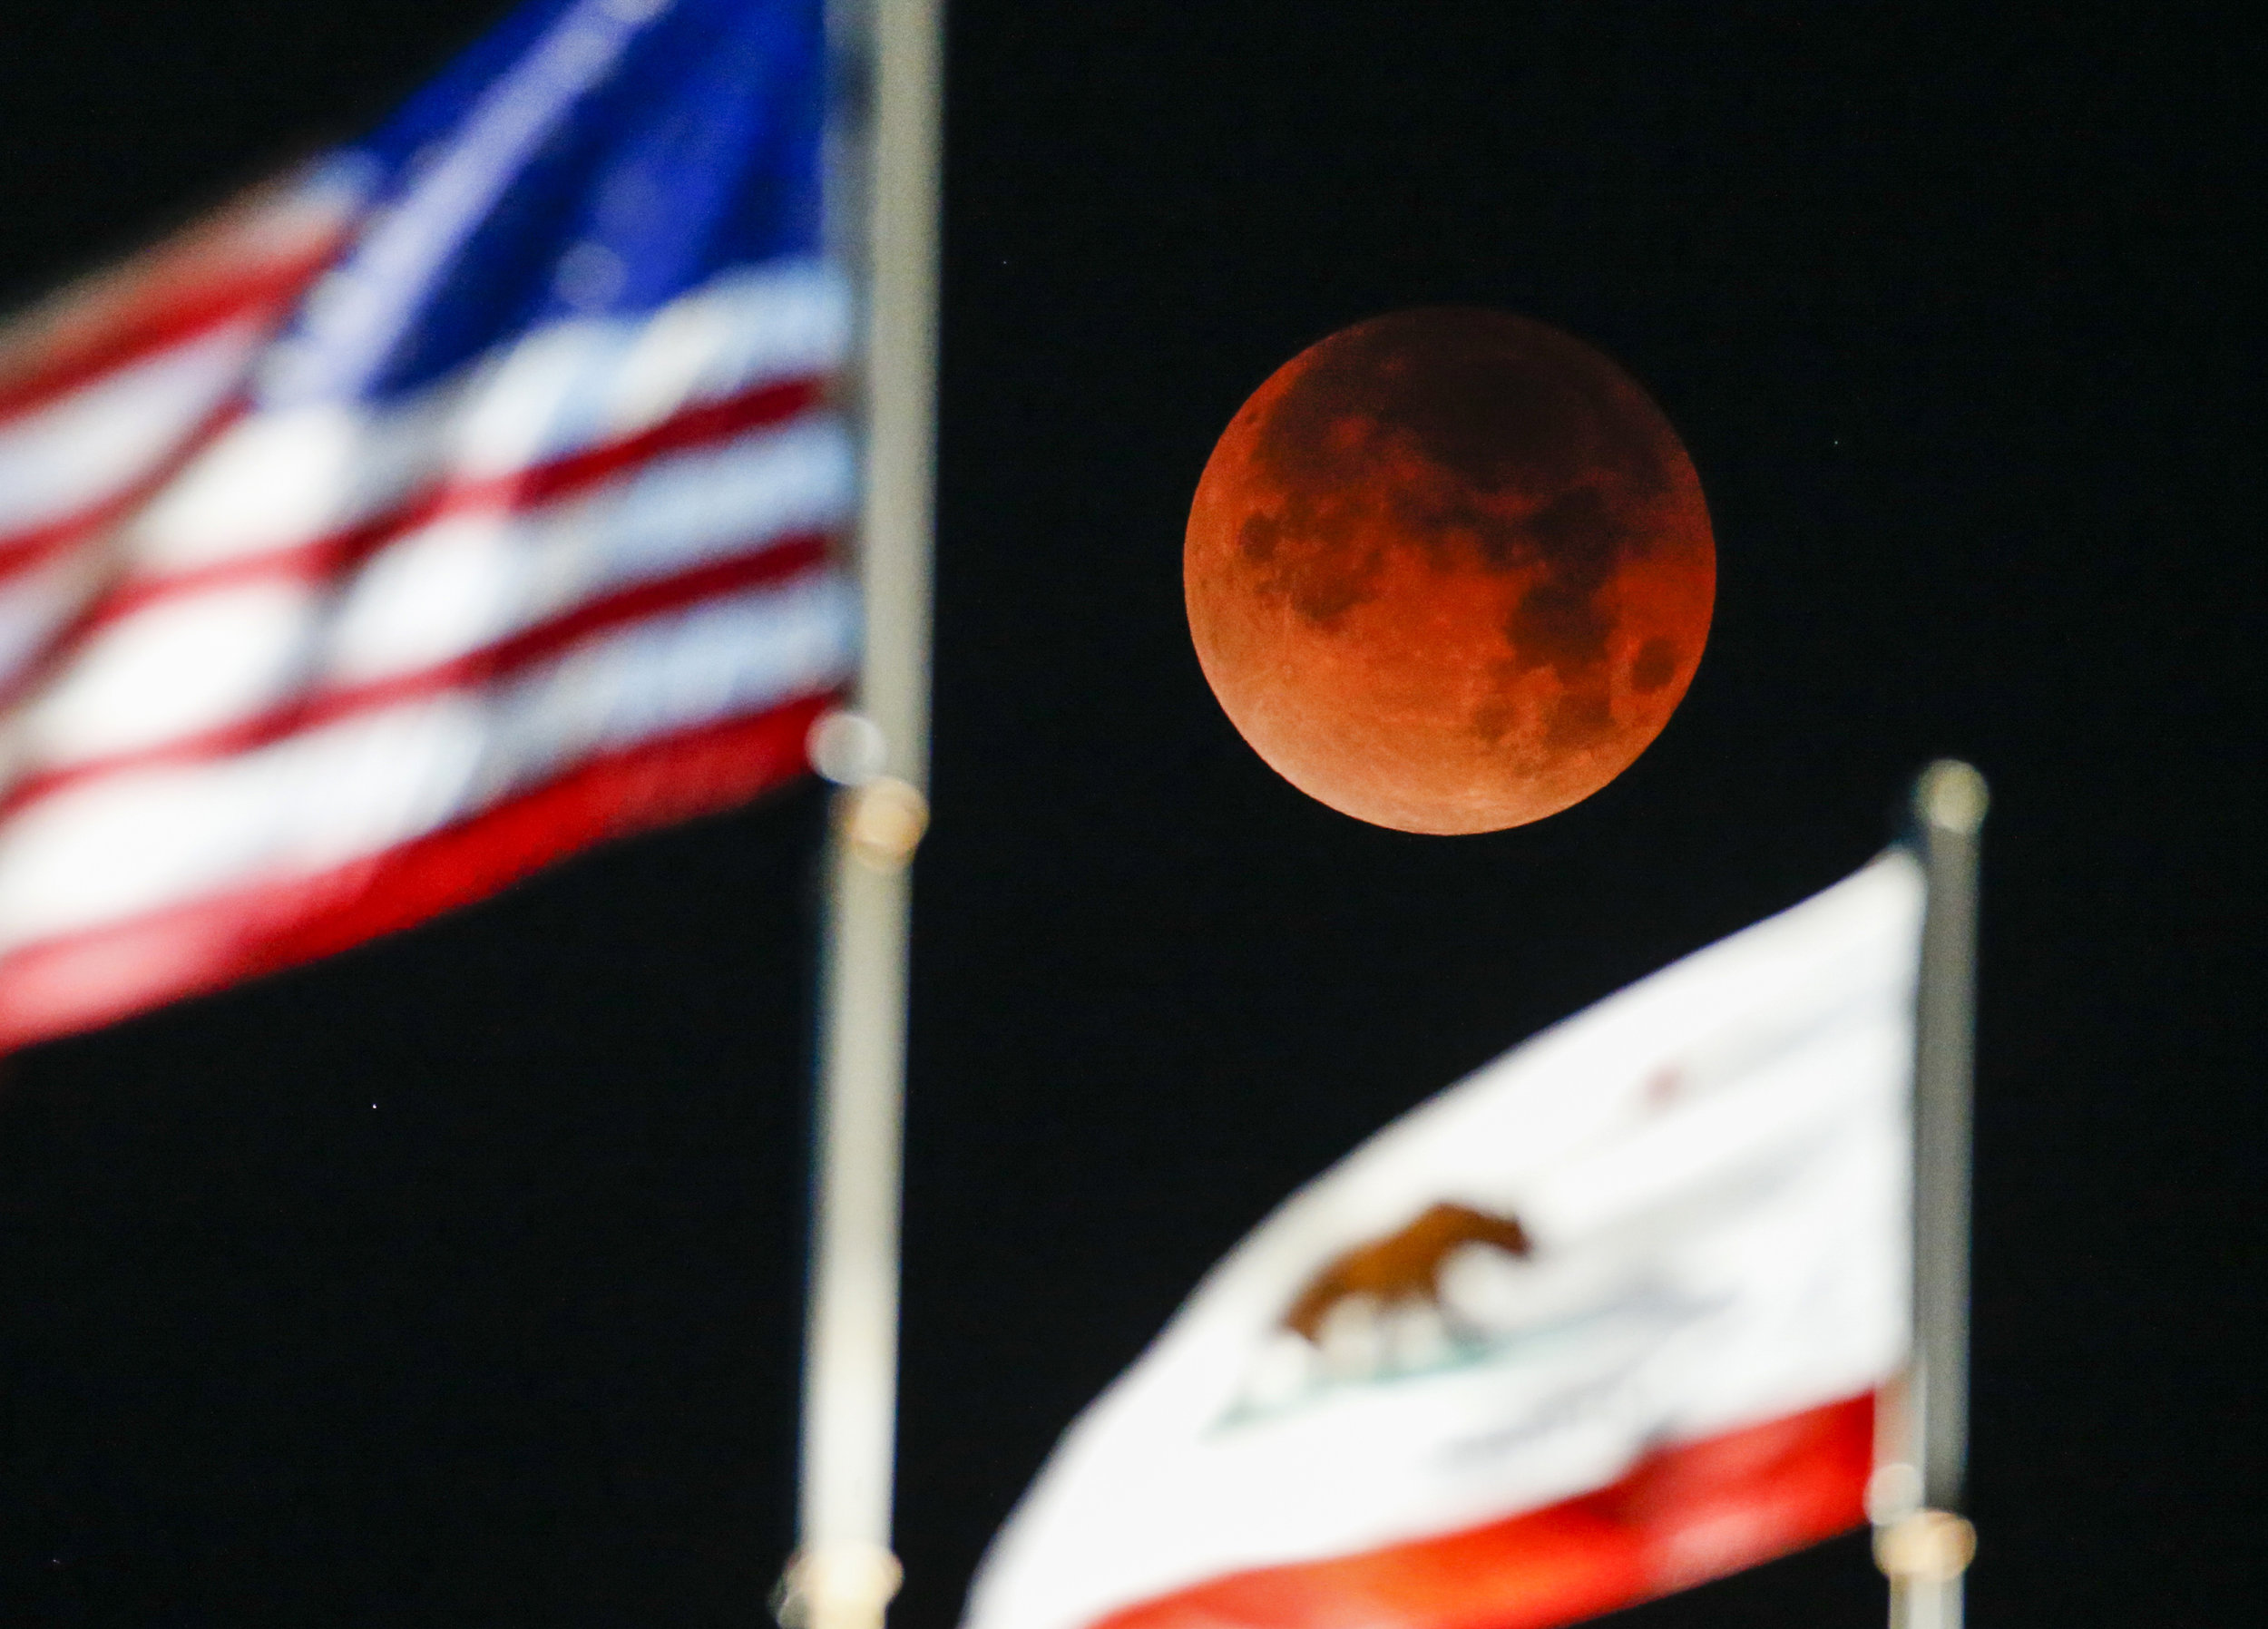  A rare celestial occurrence called a 'Super Blue Blood Moon' is seen behind the flags of U.S. and California State at Santa Monica Beach in Santa Monica, California, Wednesday, Jan. 31, 2018. 